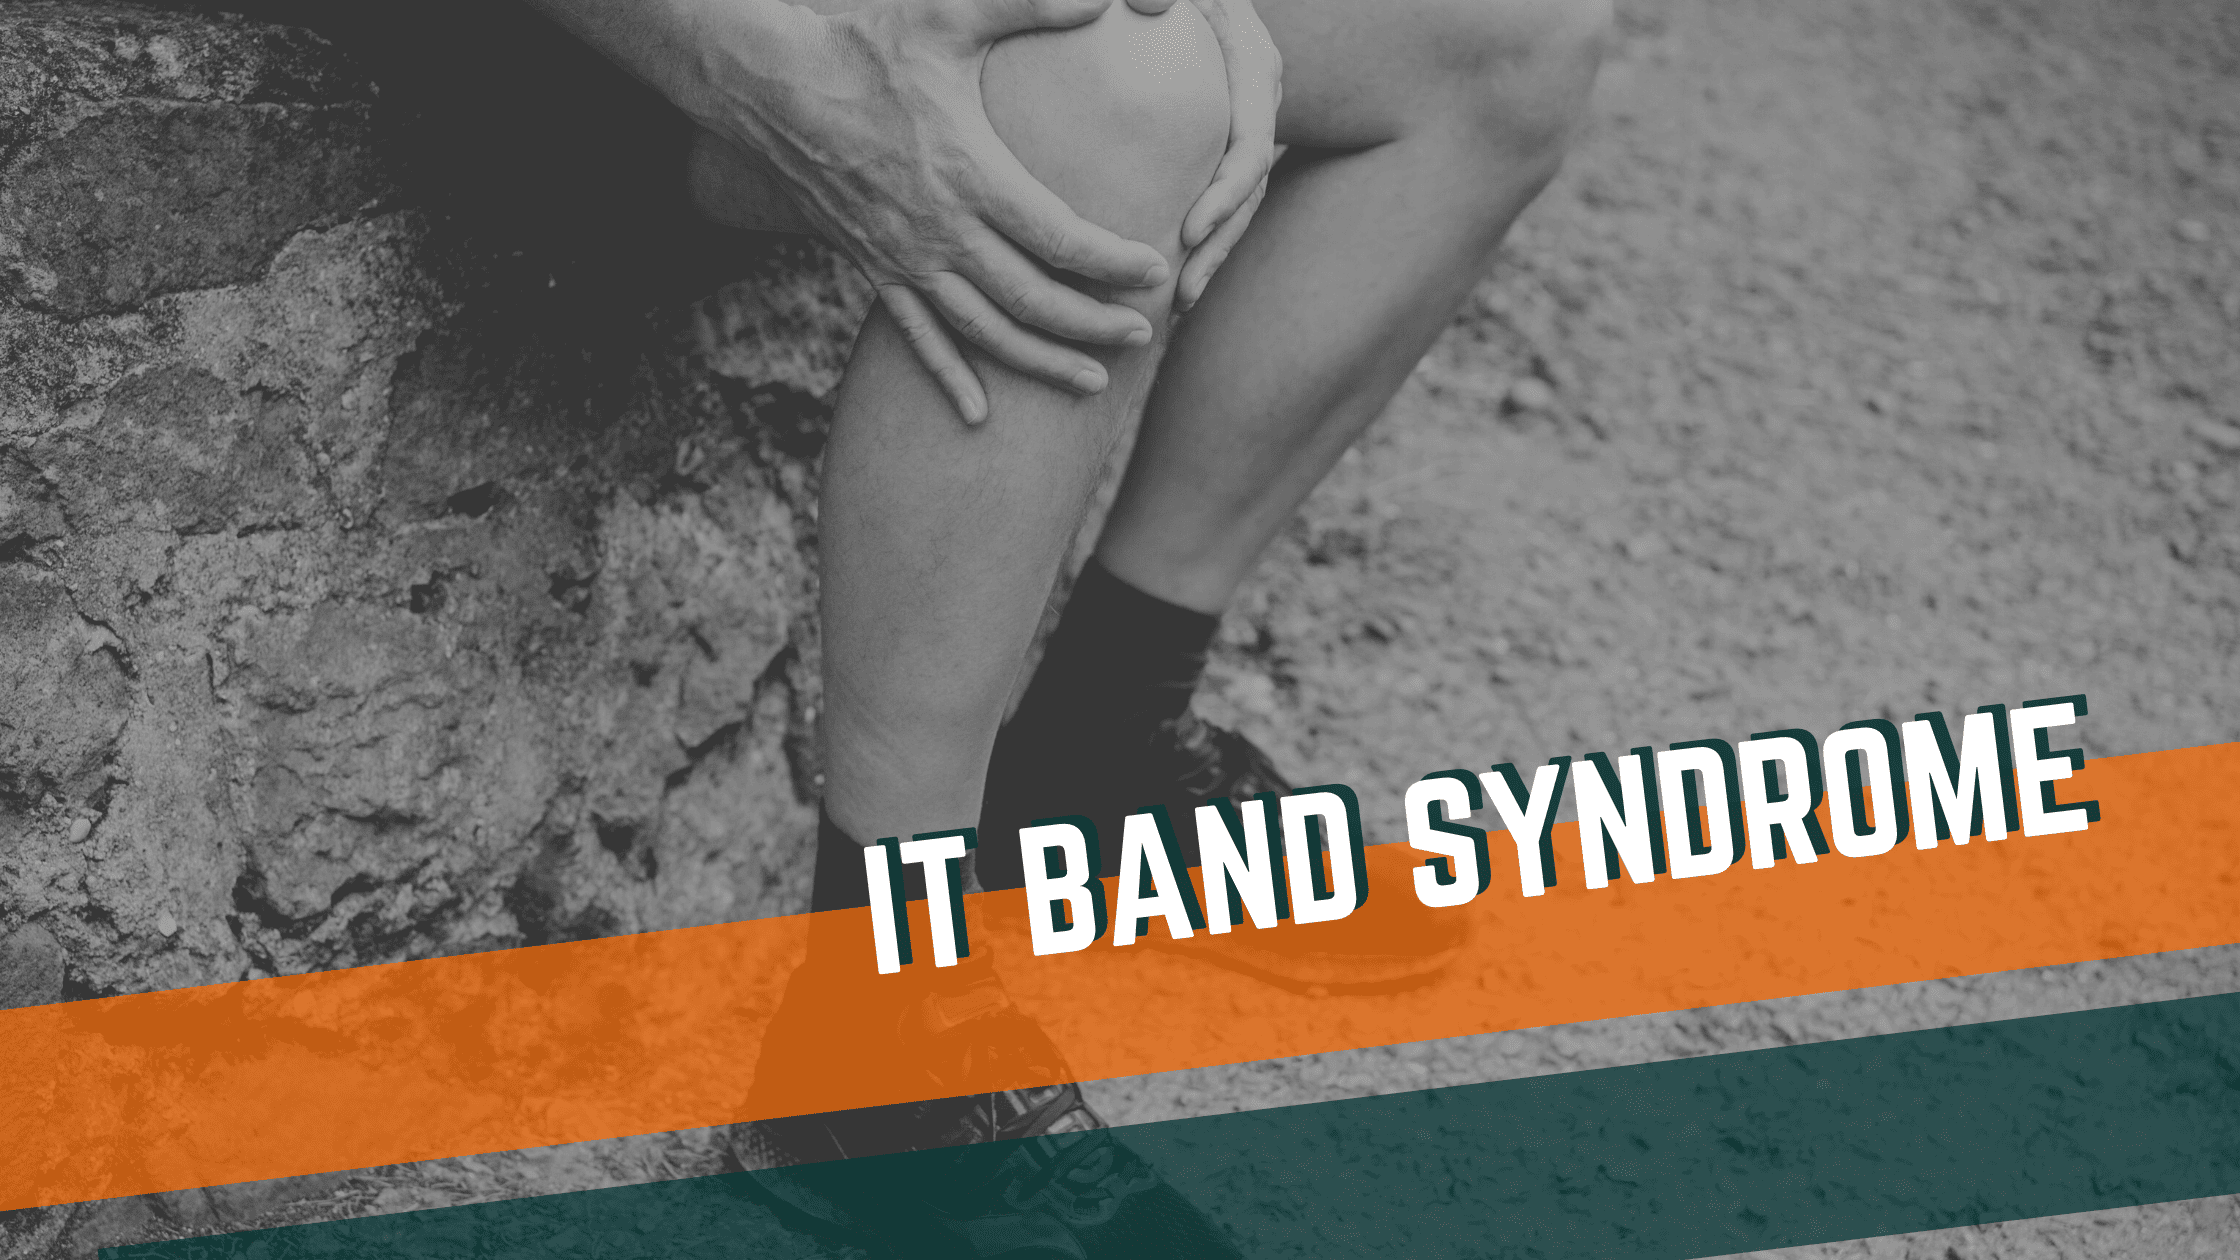 Featured image for “IT Band Syndrome”